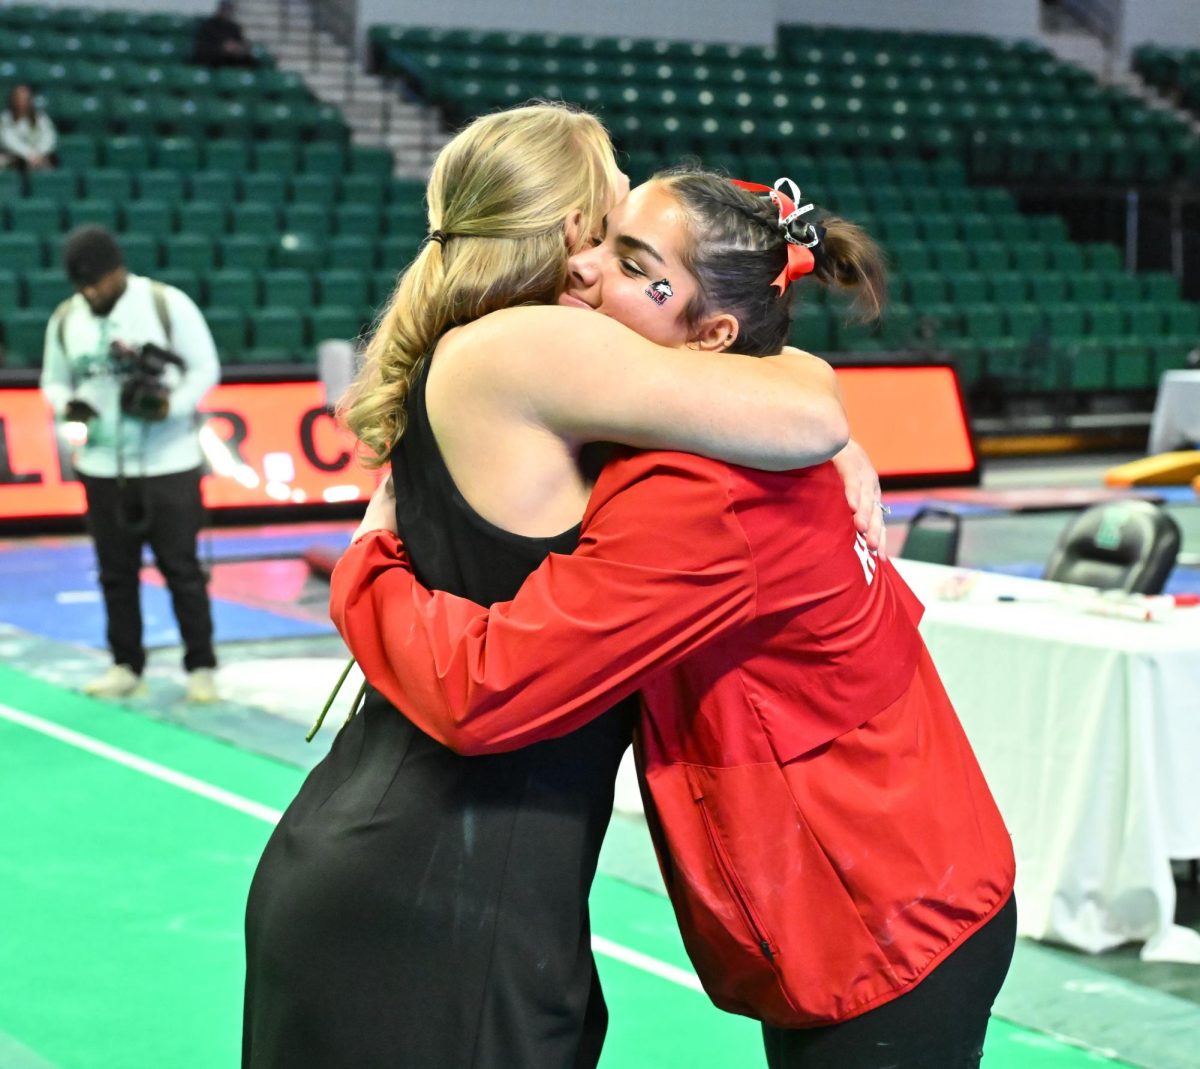 NIU senior gymnast Alyssa Al-Ashari hugs Eastern Michigan University gymnastics head coach Katie Minasola after Sundays MAC meet at the George Gervin GameAbove Center in Ypsilanti, Michigan. Al-Ashari, a native of Lansing, Michigan, competed in her home state for the final time, earning second-place finishes on bars and beam. (Steve King | EMU Athletics)